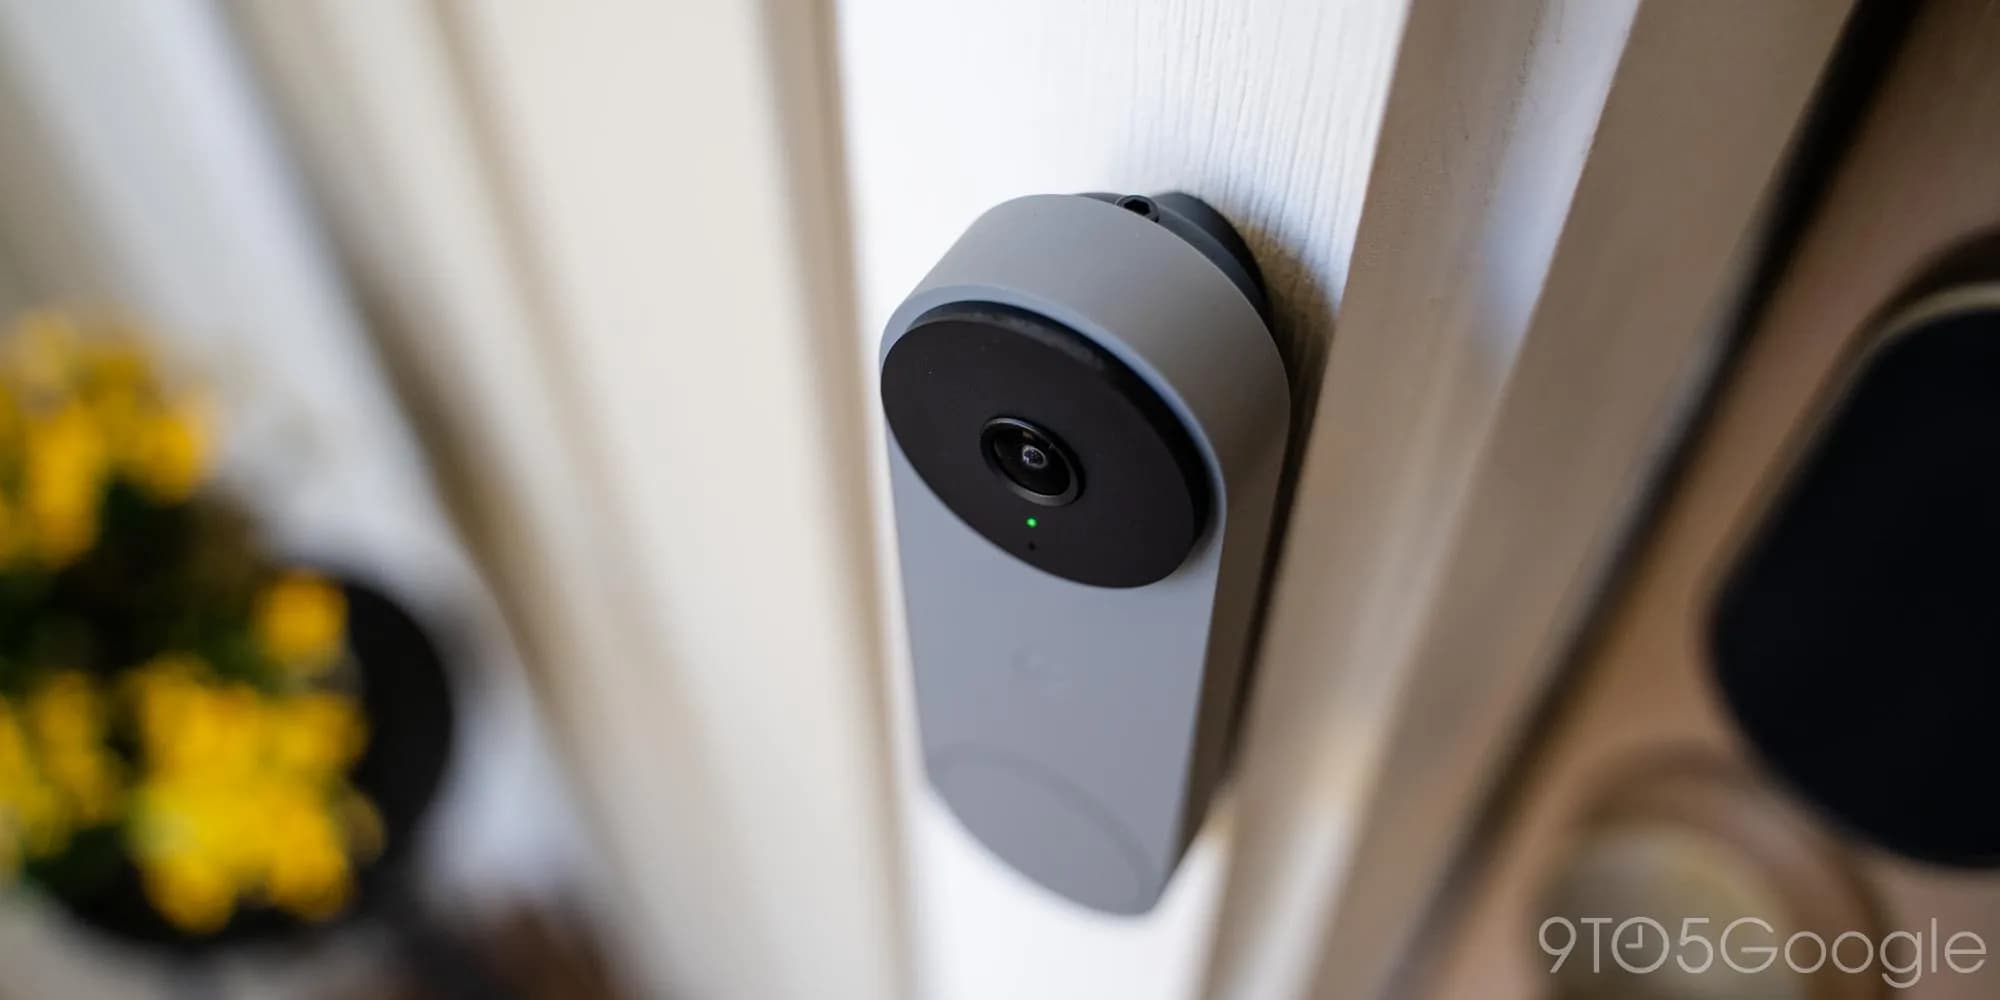 11 things to love about the New Nest Cam and Doorbell